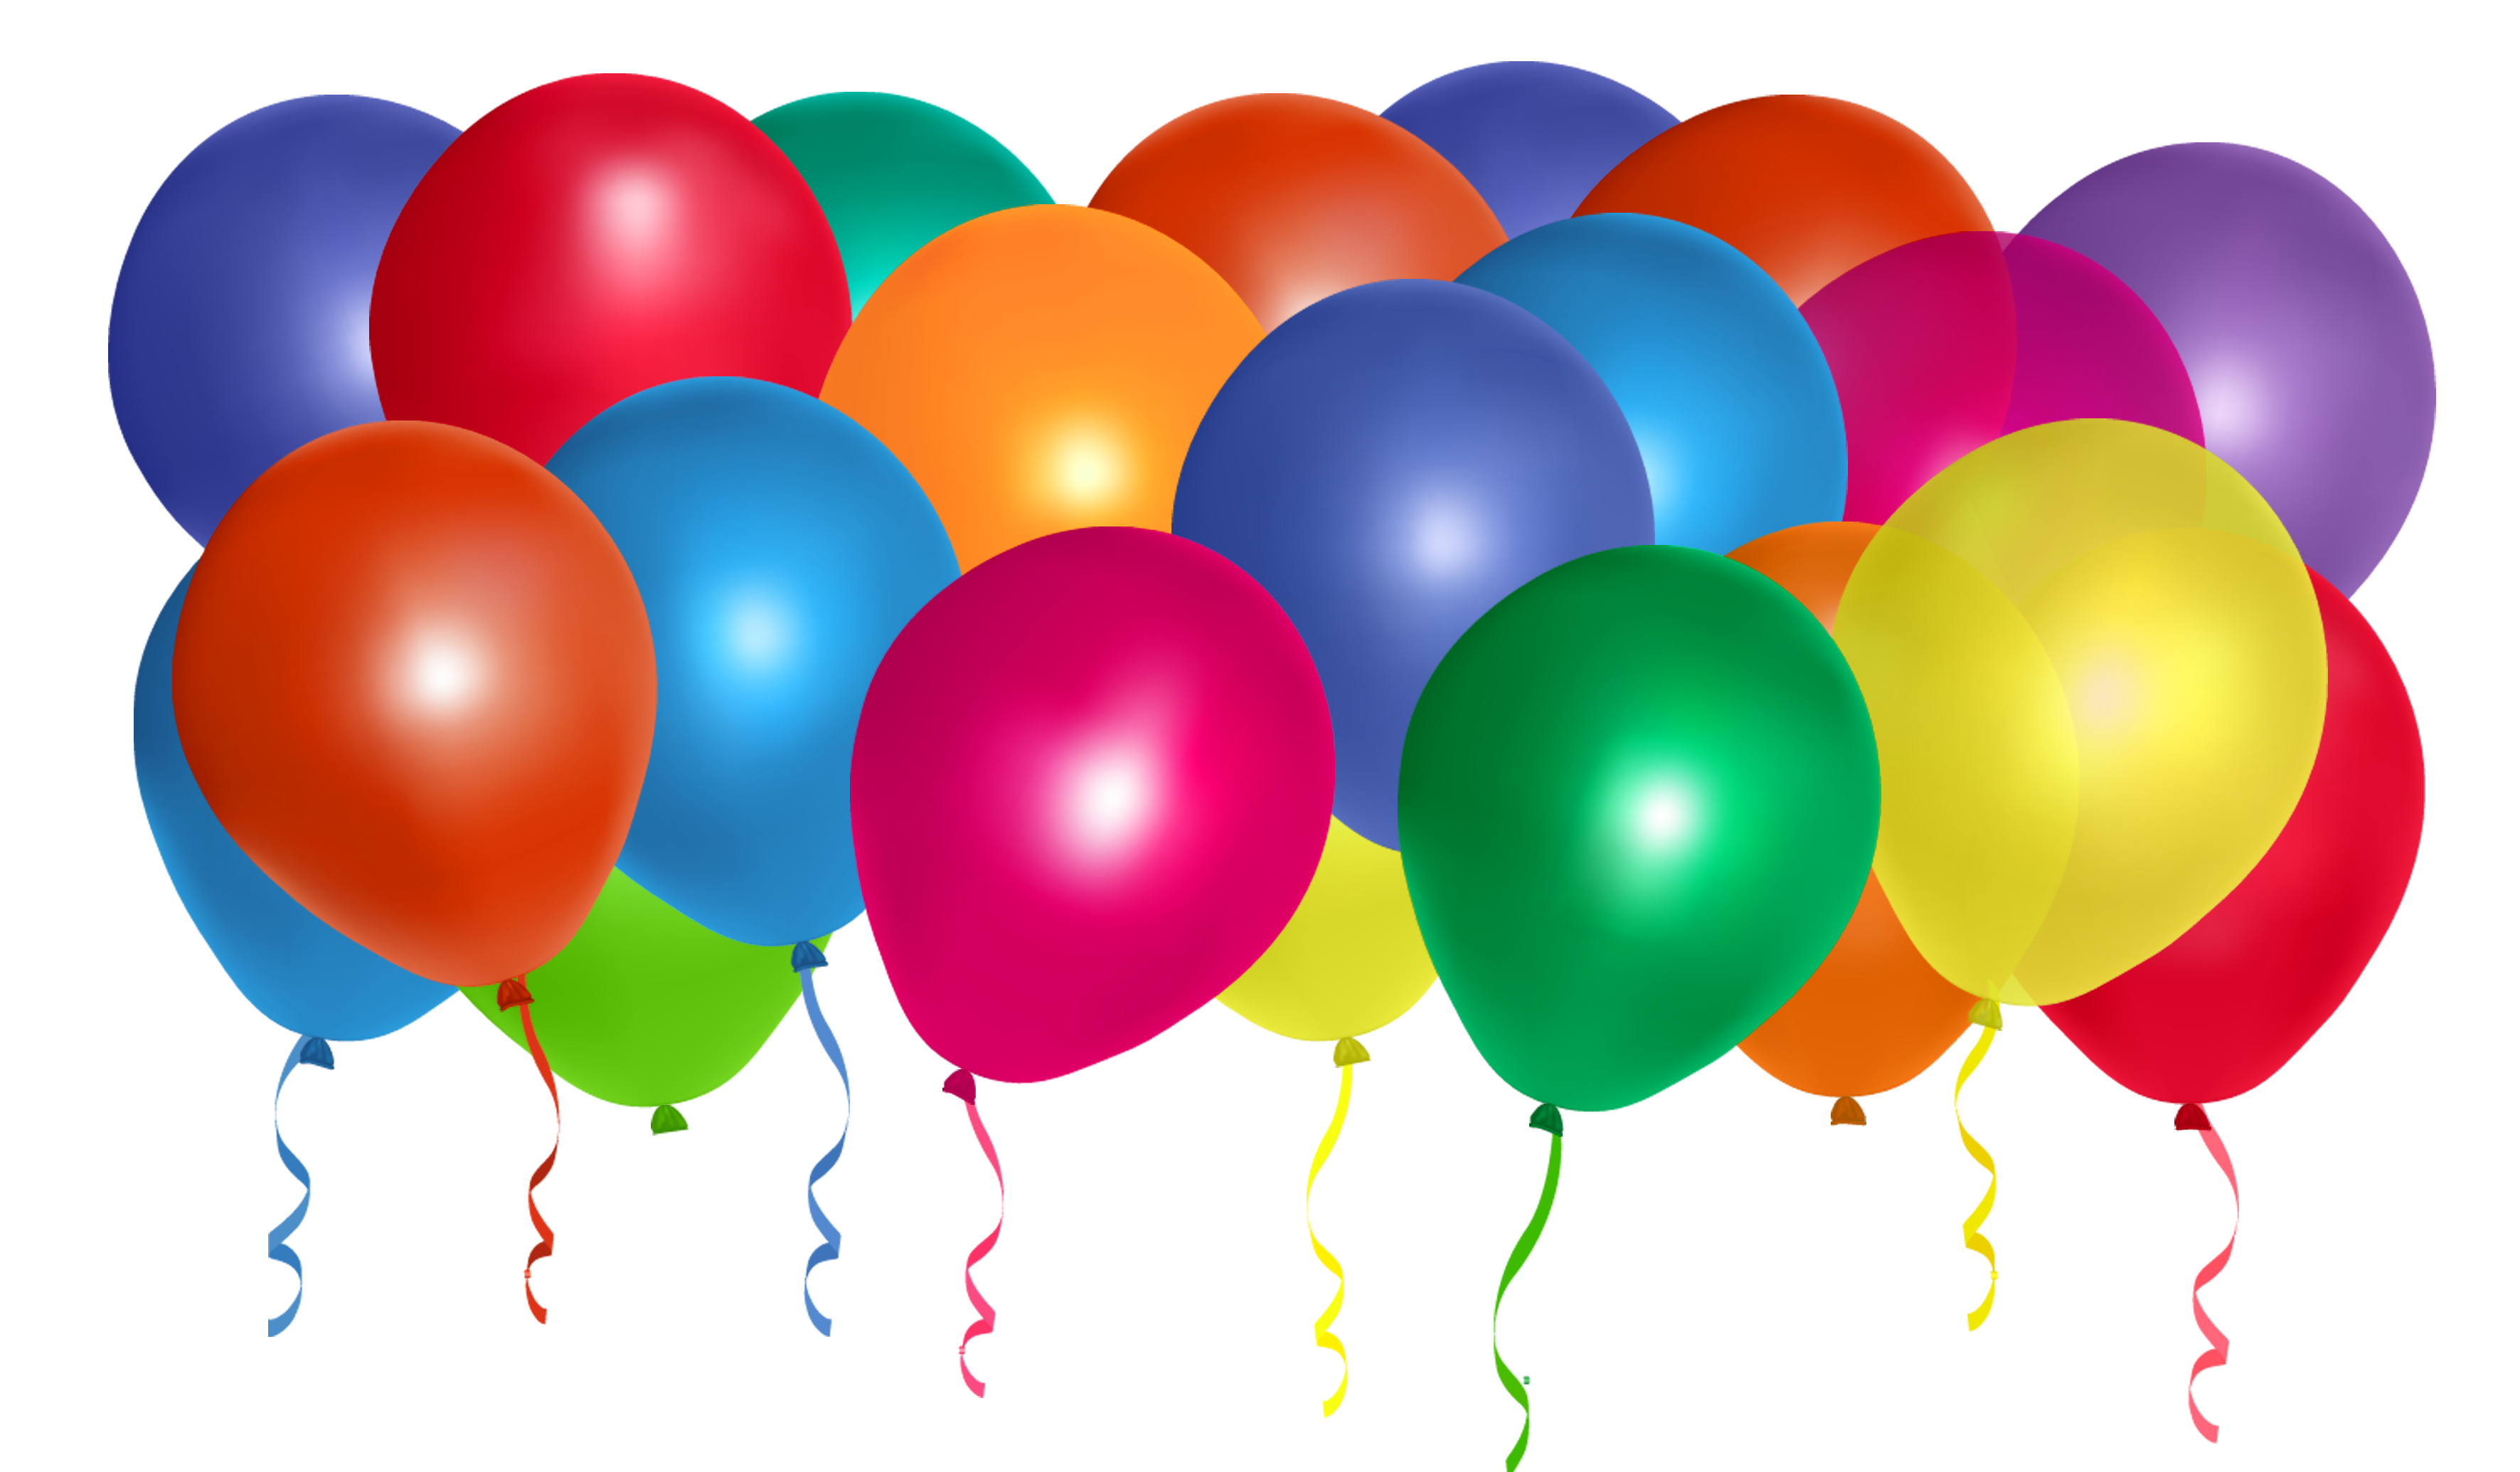 Balloon Free Download Clipart